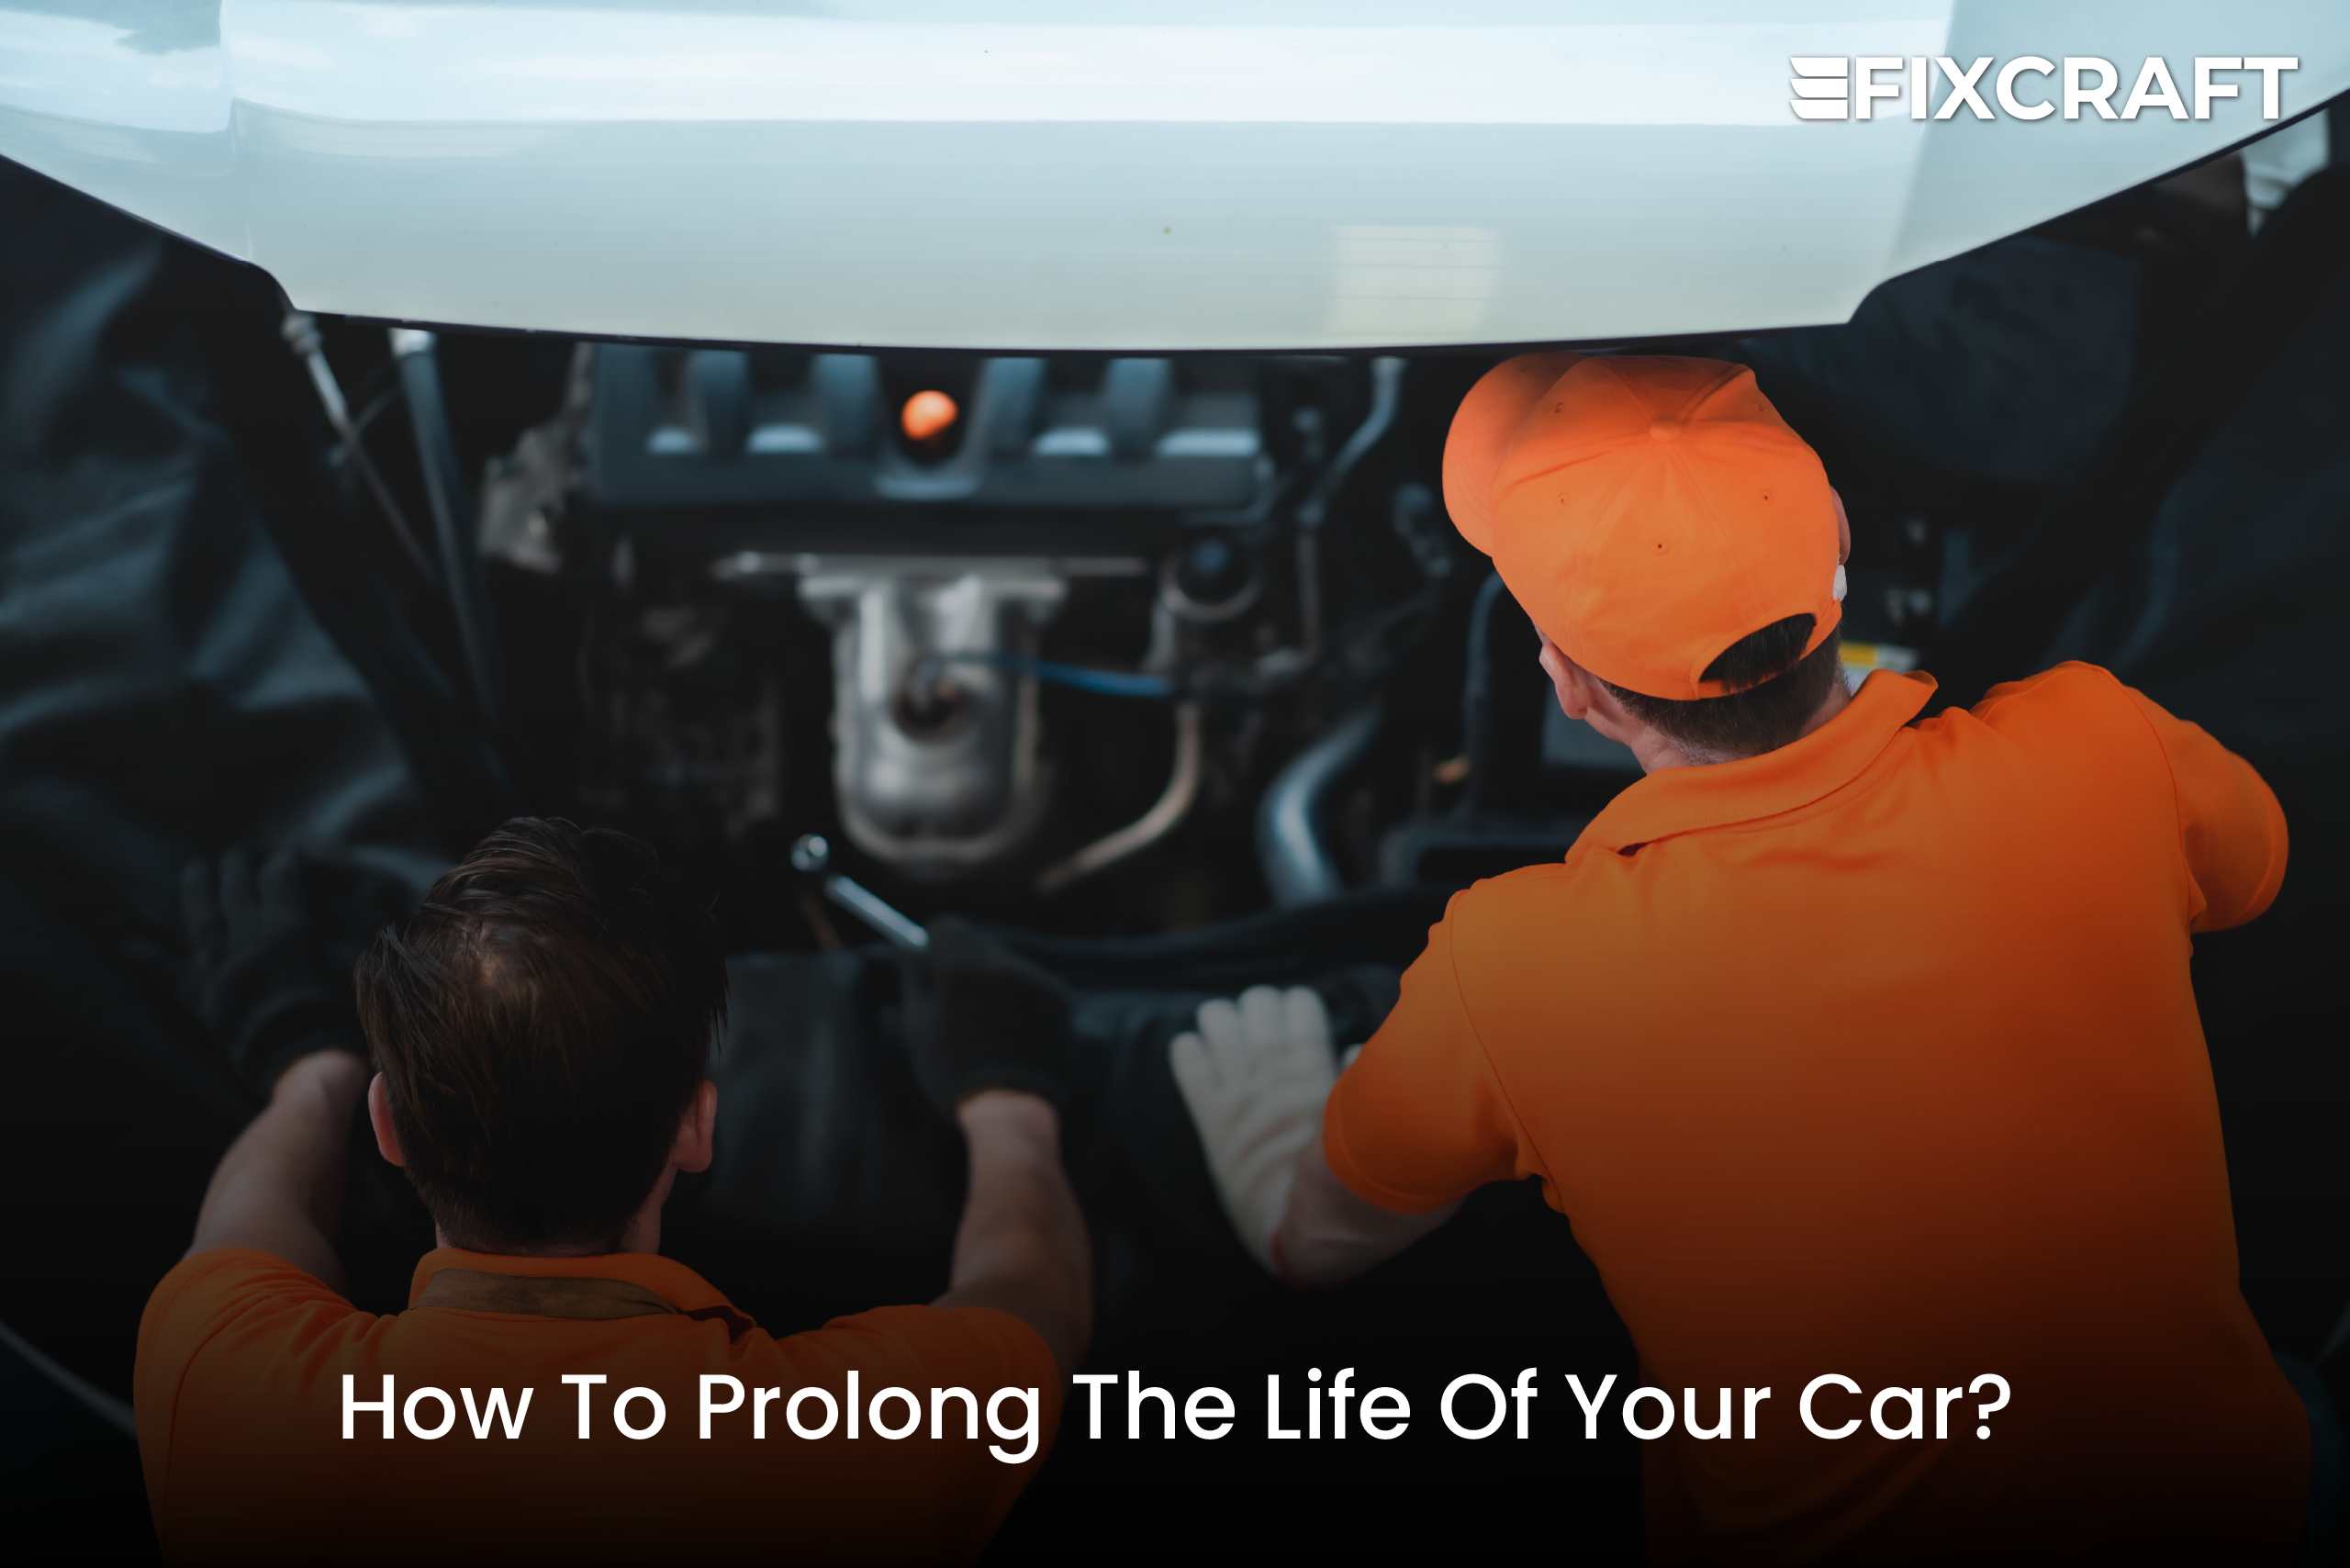 How To Prolong The Life Of Your Car By Fixcraft